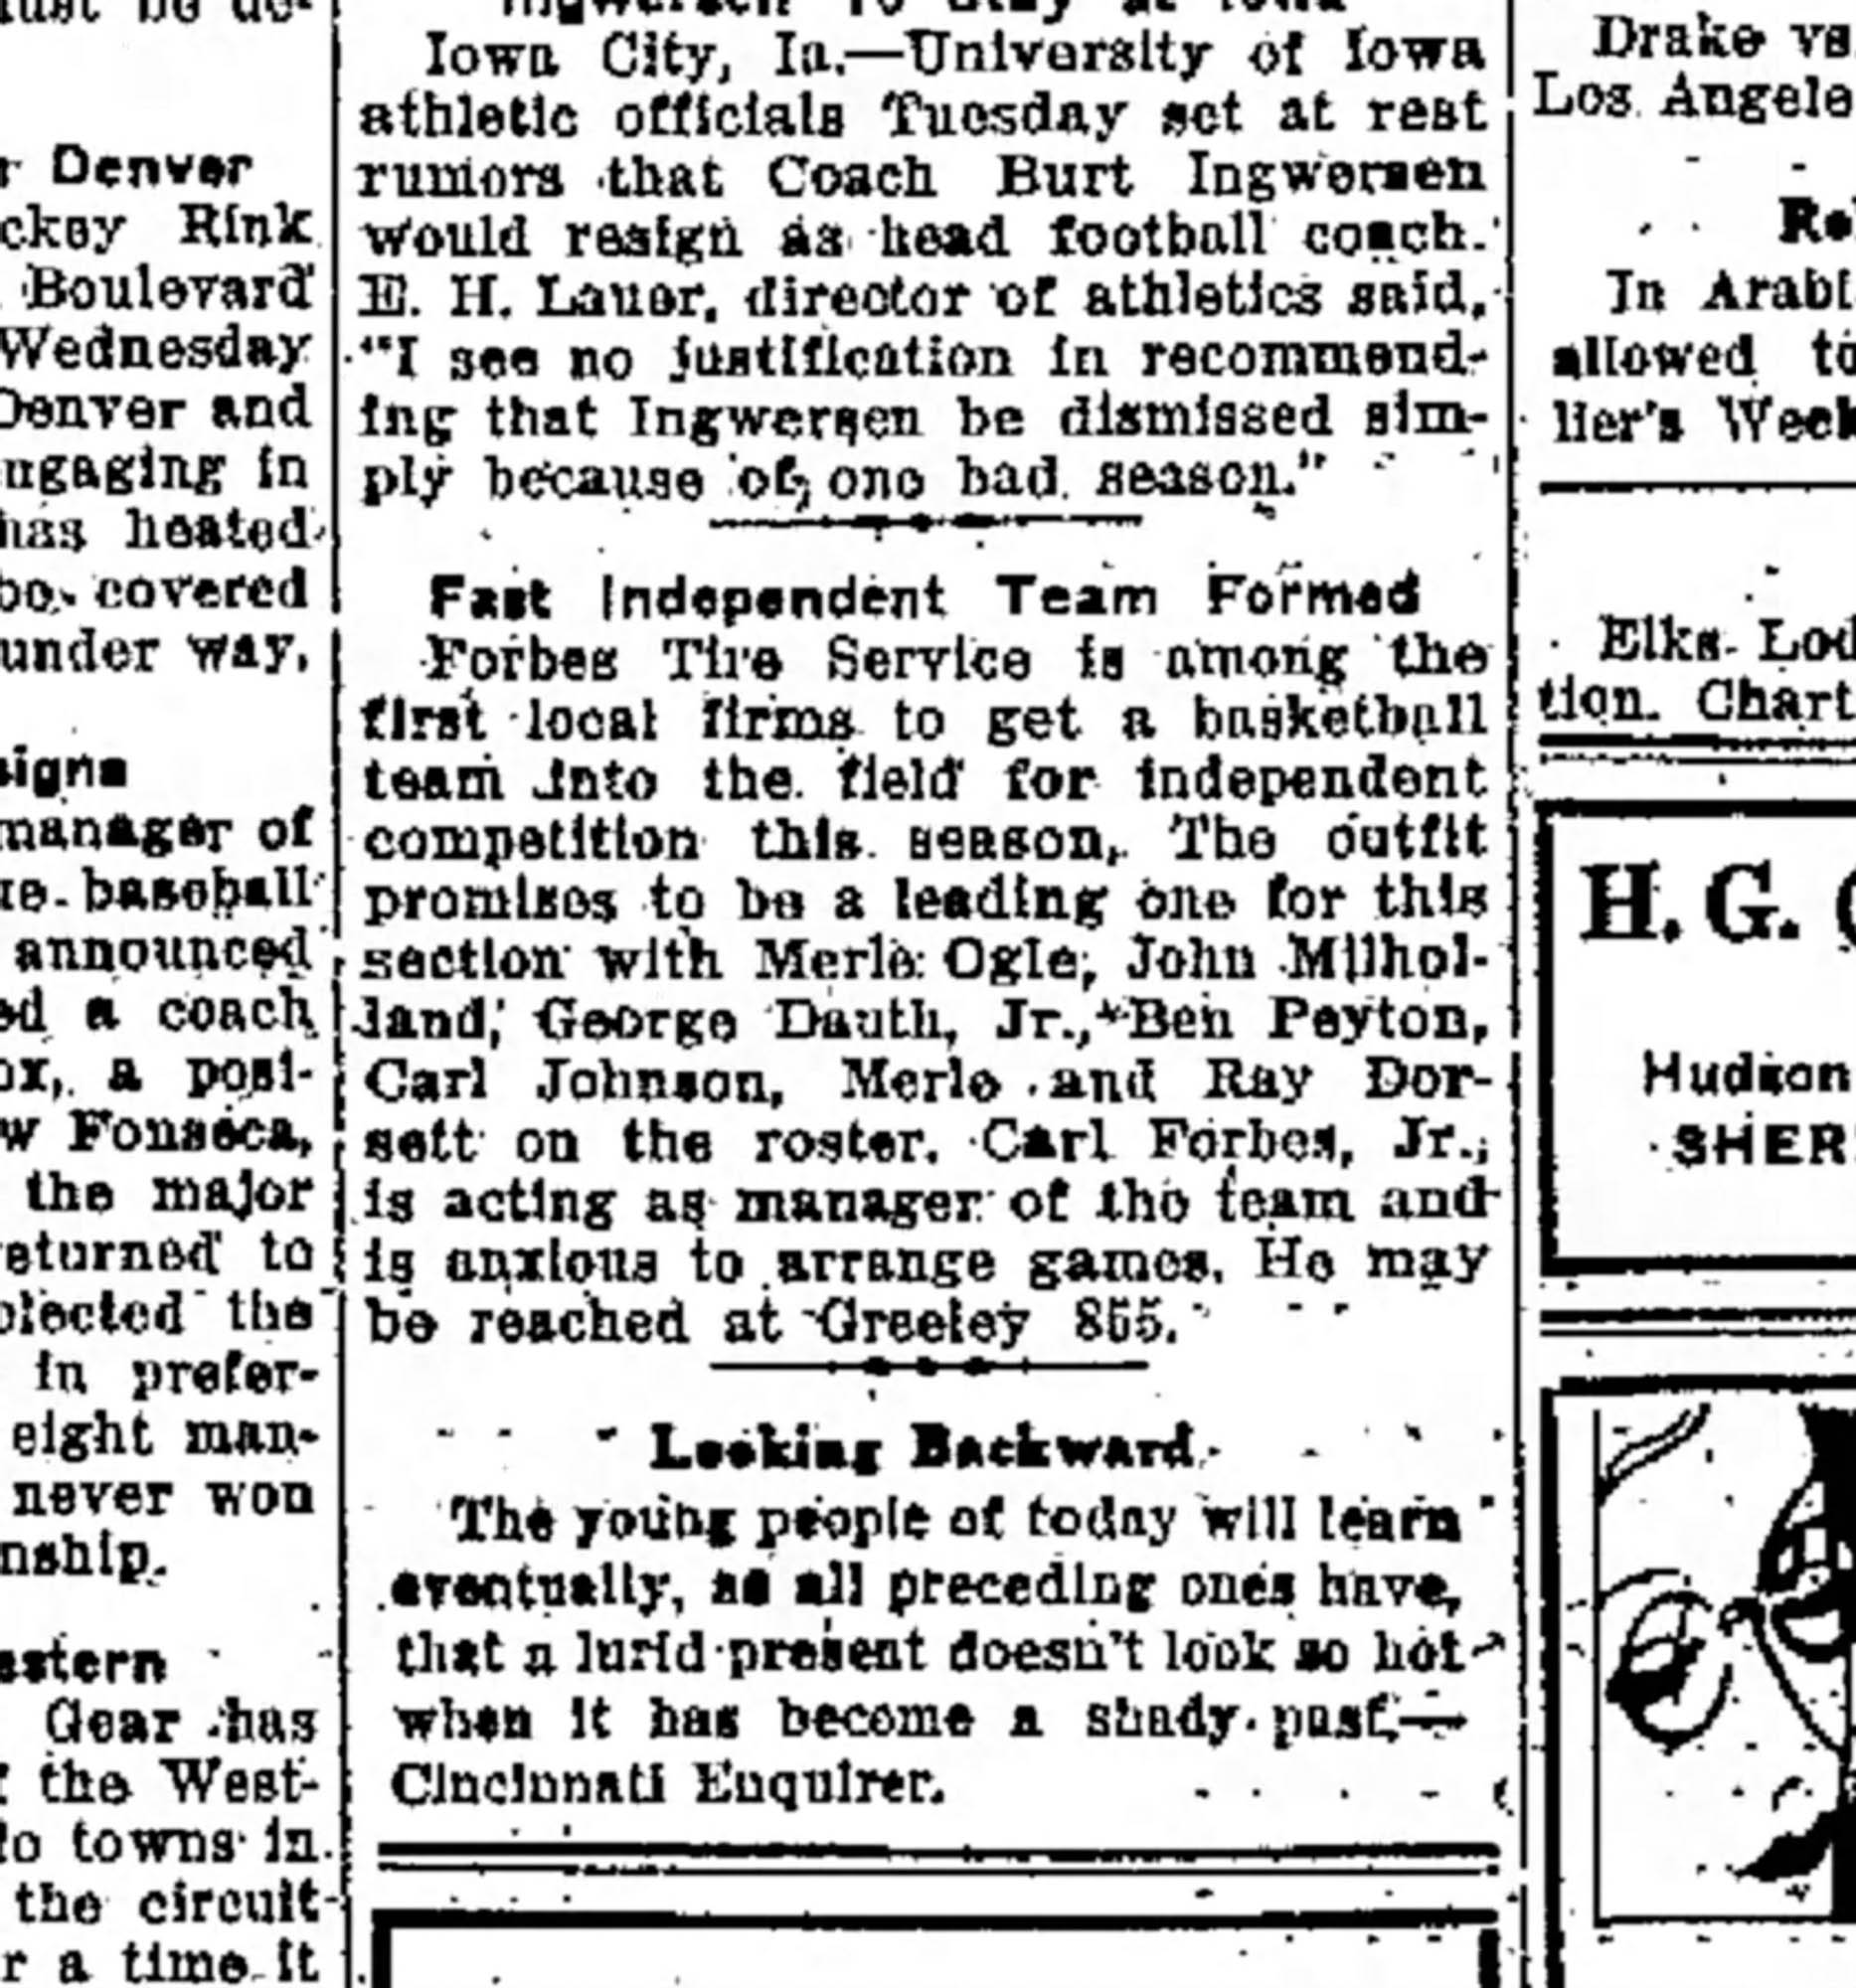 Dauth Family Archive - 1931-12-02 - Greeley Daily Tribune - June Dauth On Forbes Basketball Team